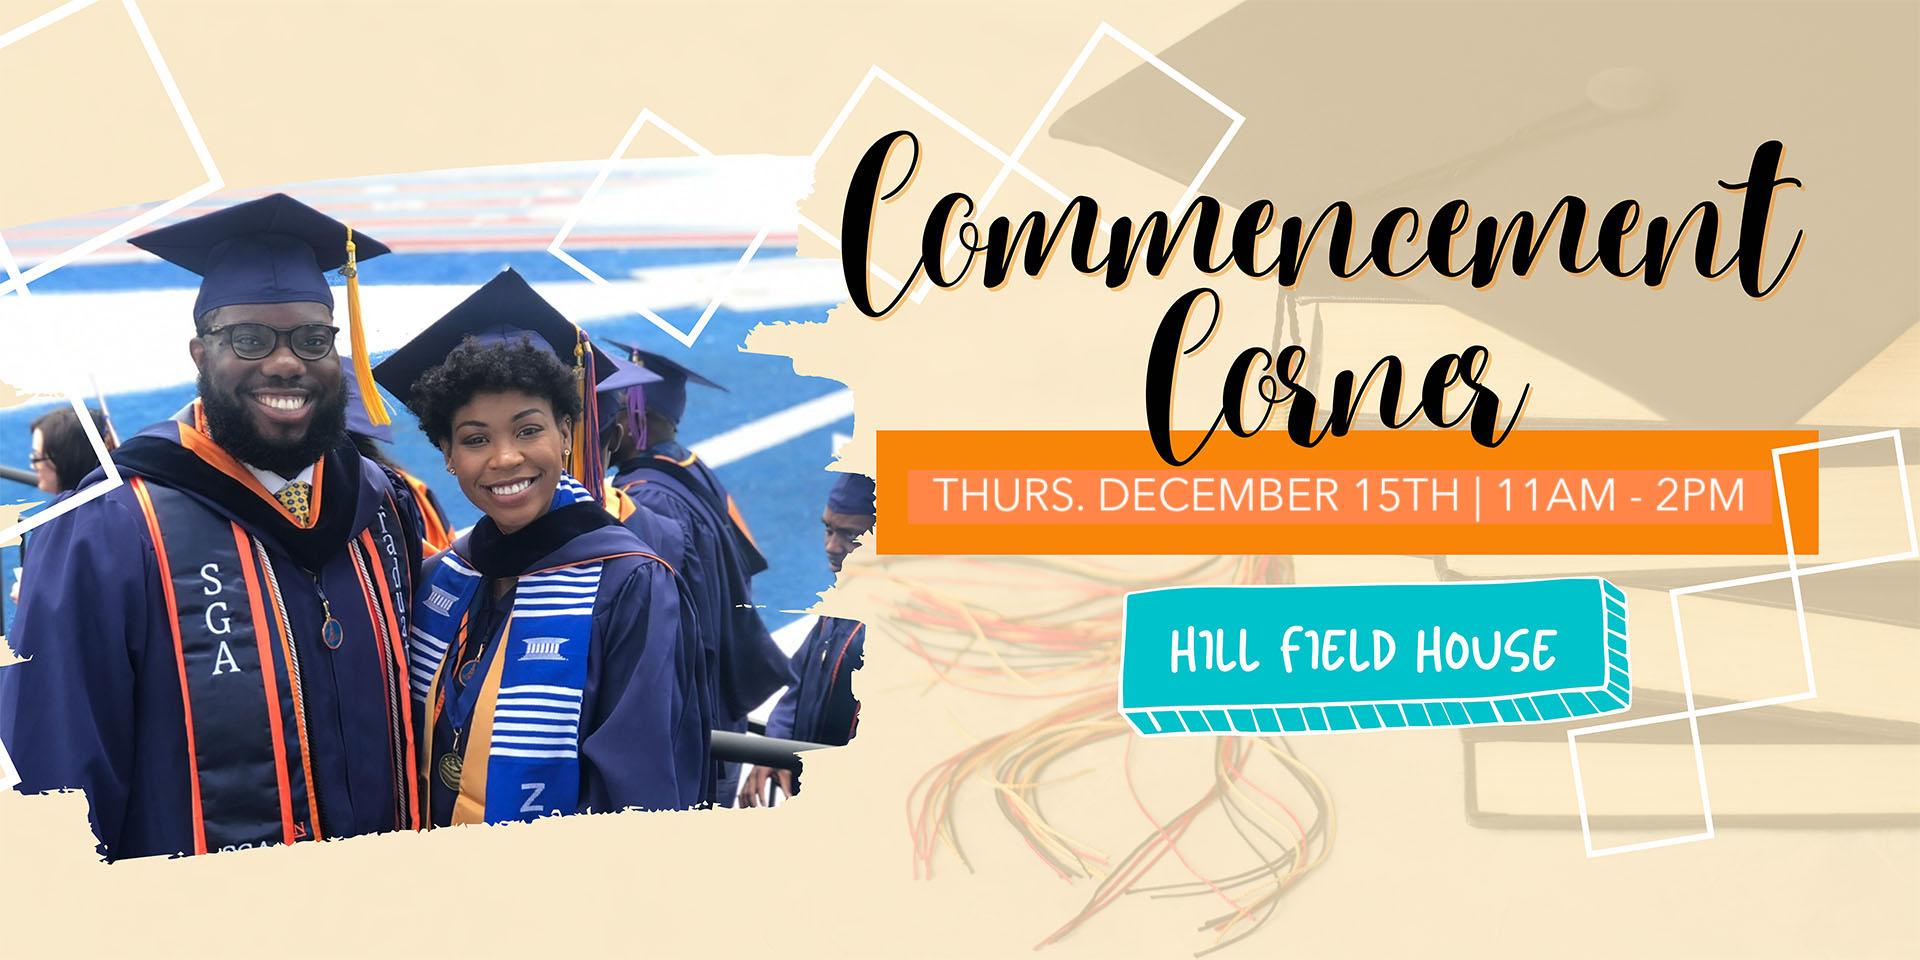 Commencement Corner event for December 15 from 11am to 2pm